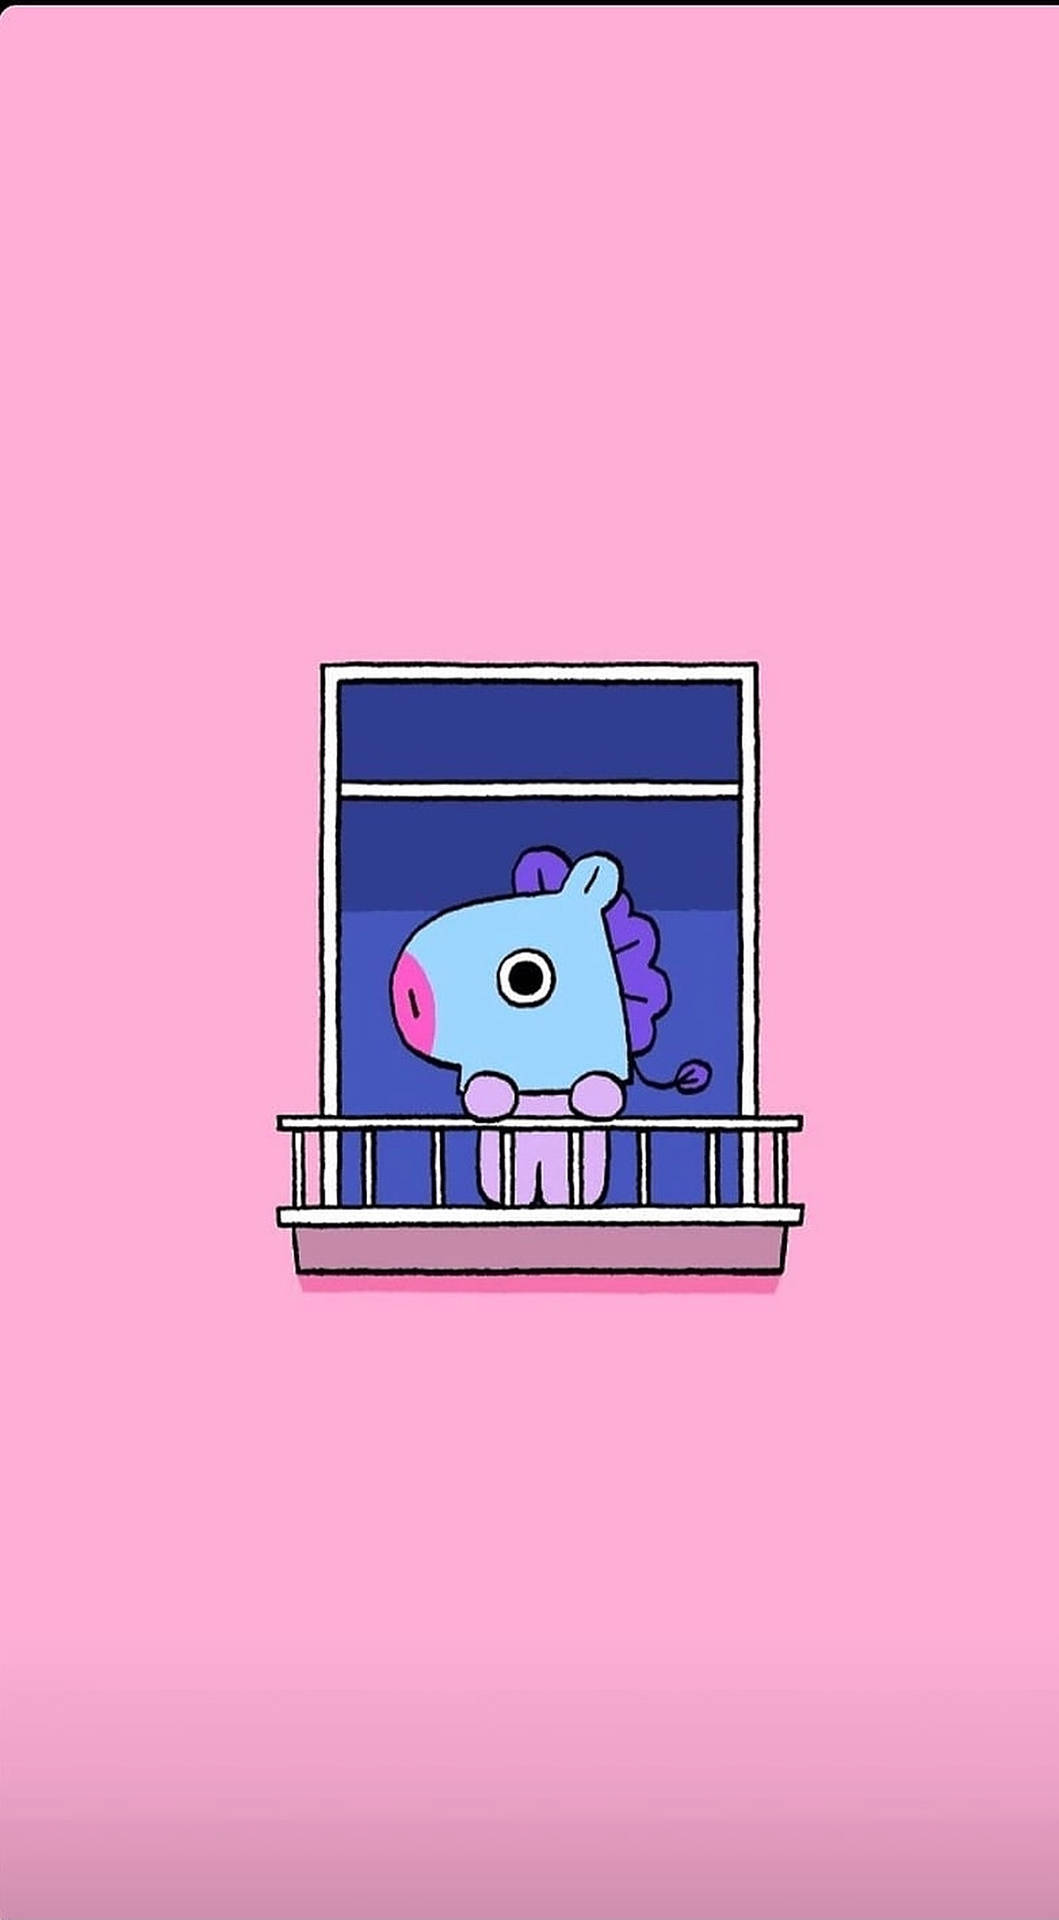 Mang Bt21 On The Balcony Background